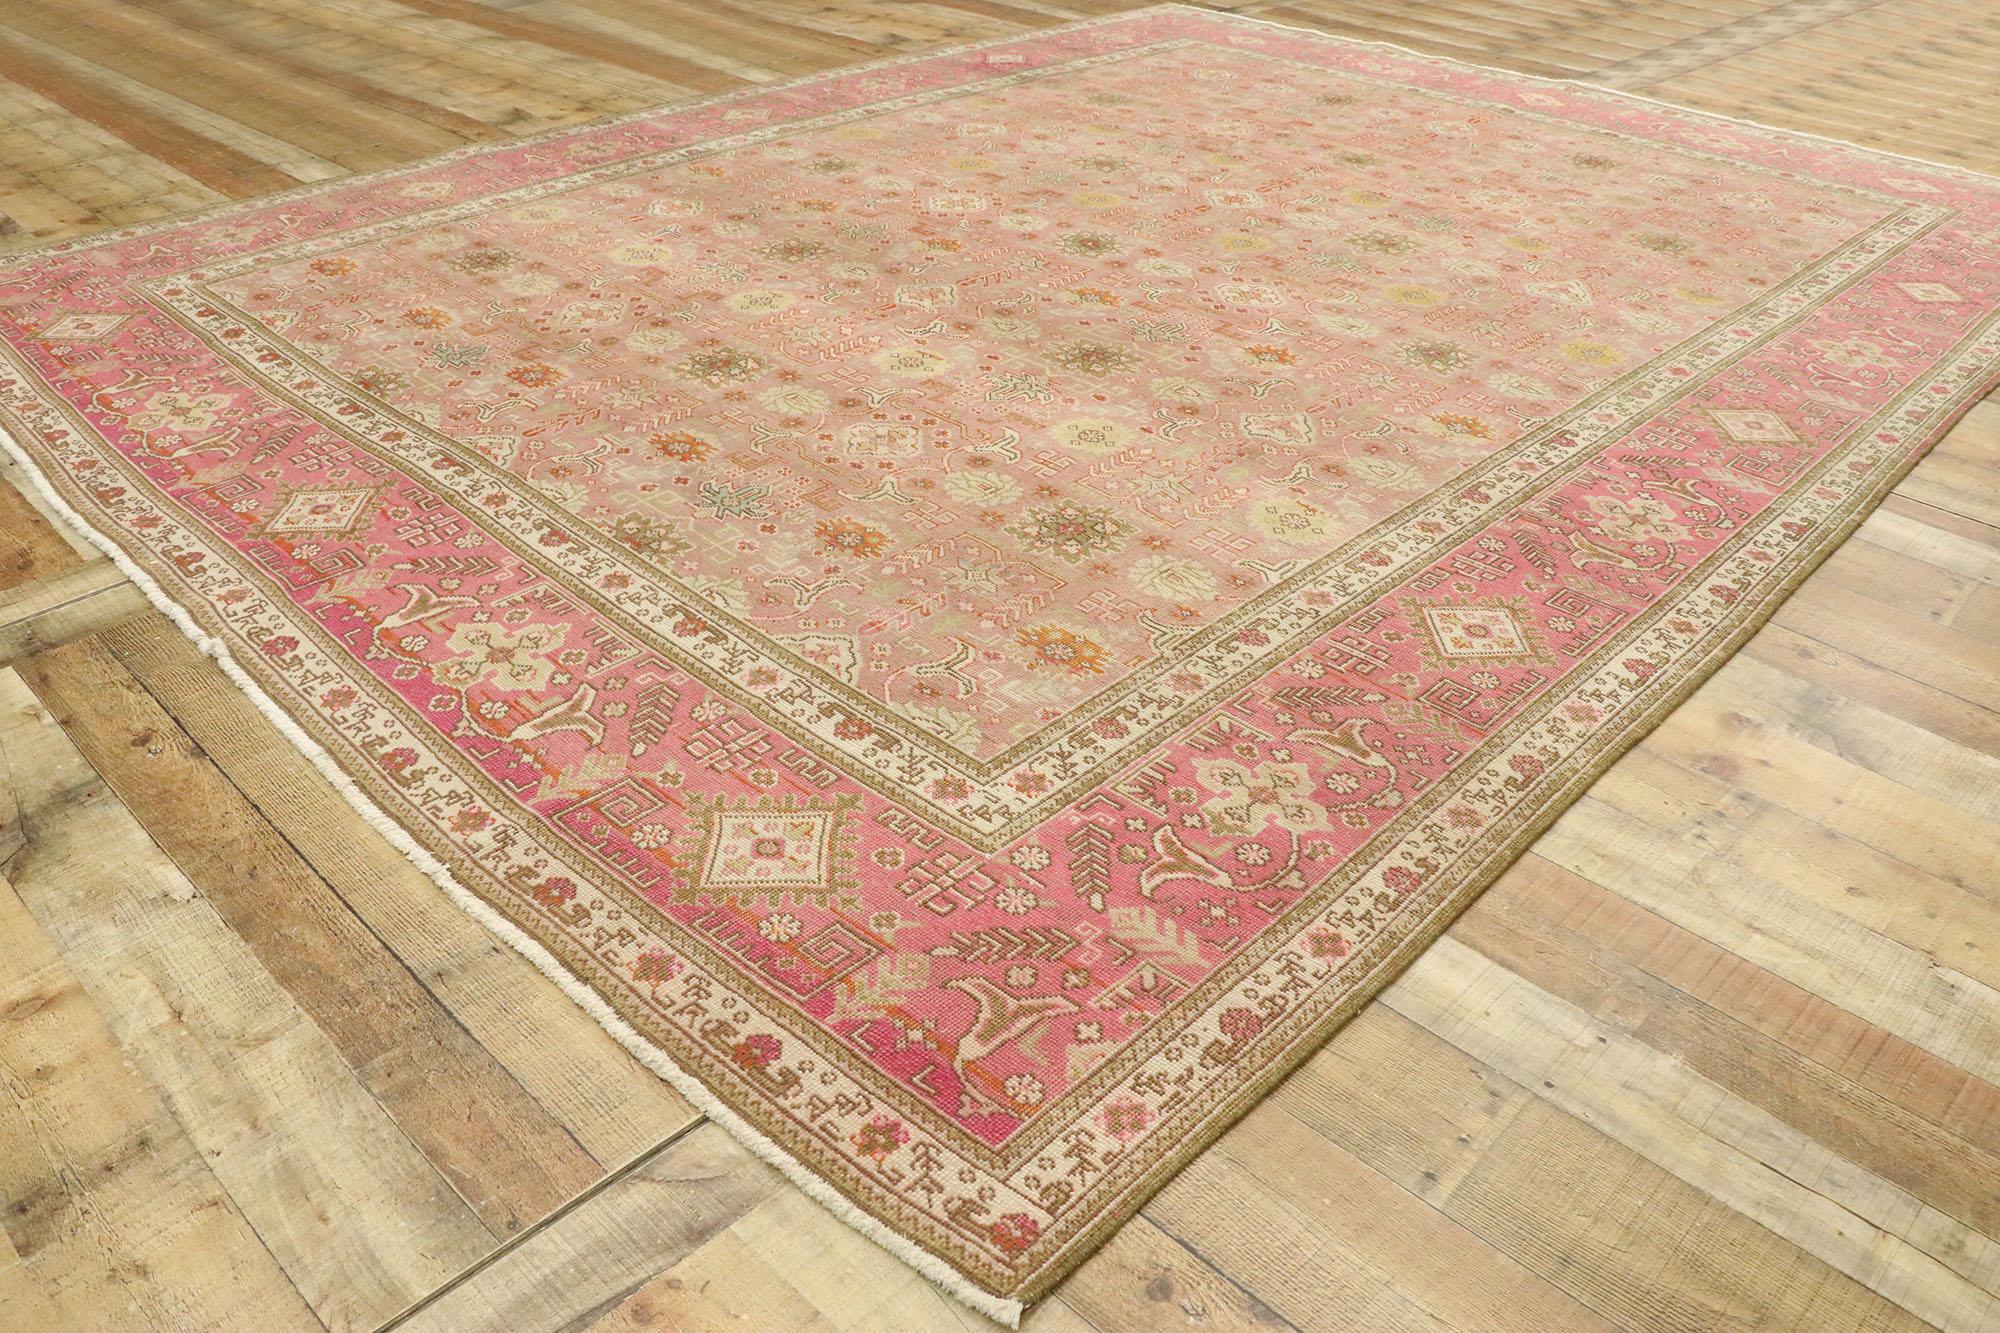 Distressed Vintage Persian Tabriz Rug with Romantic Boho Chic Style In Distressed Condition For Sale In Dallas, TX